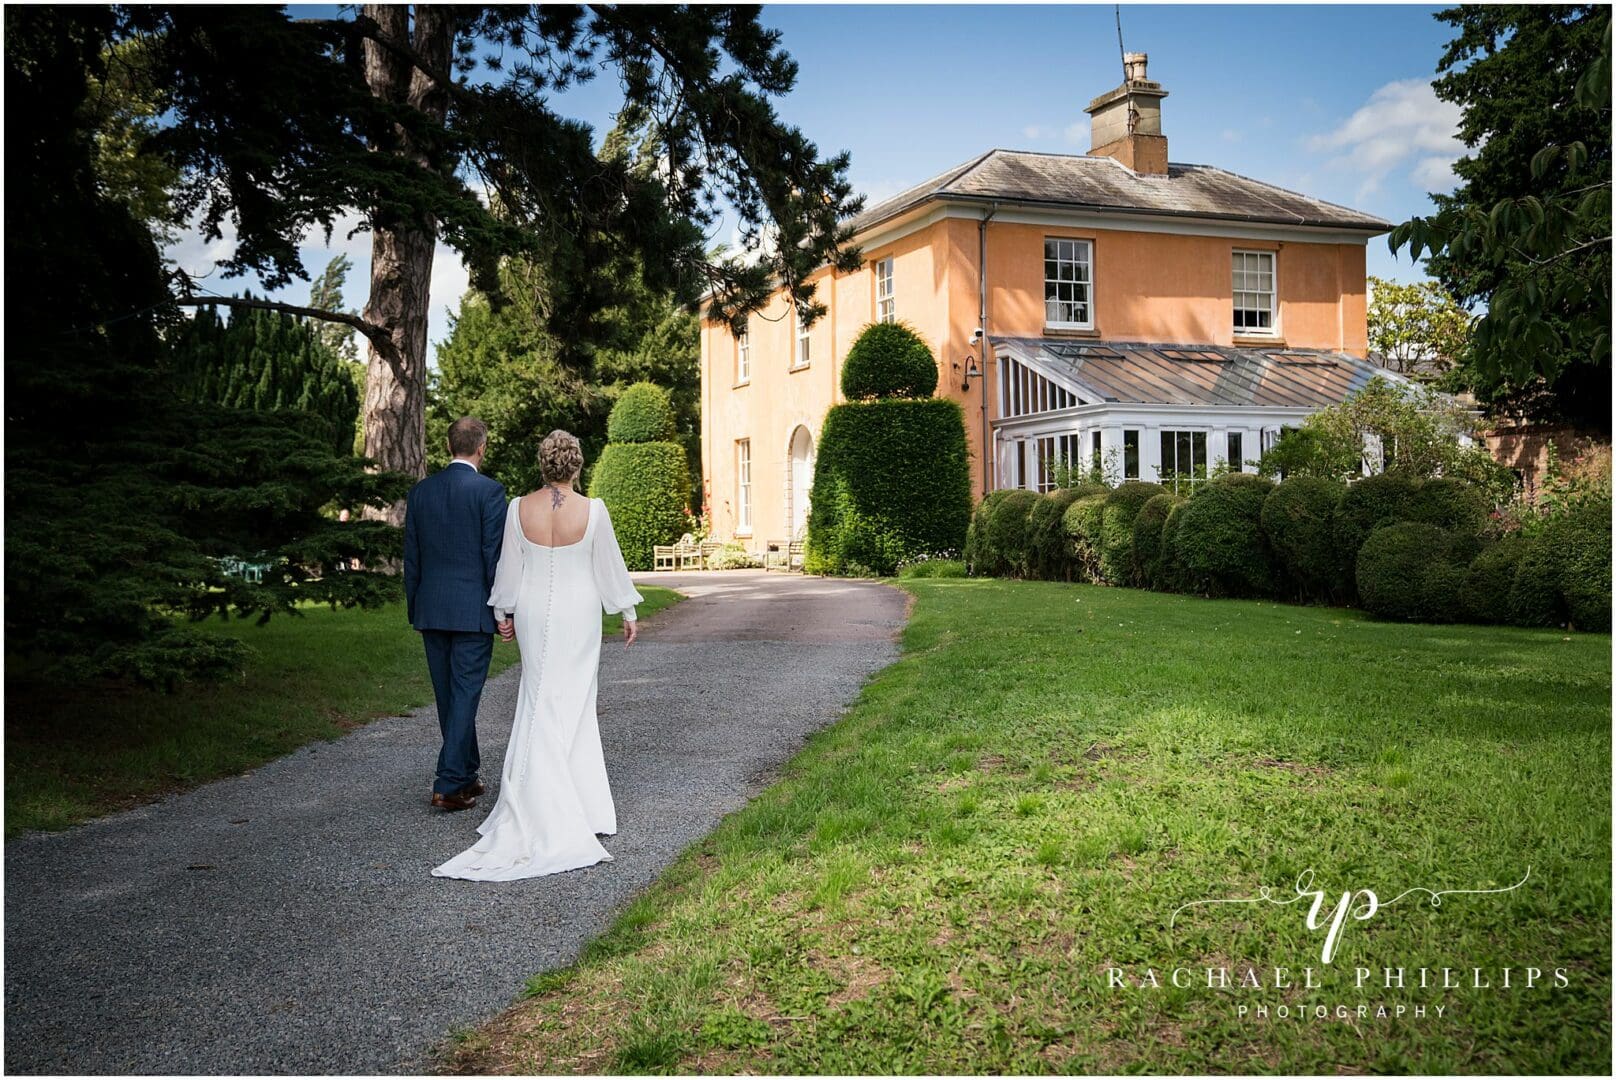 The bride and groom are walking up the drive way<br />
 and beautiful grounds to the front of Langar Hall in Nottingham.